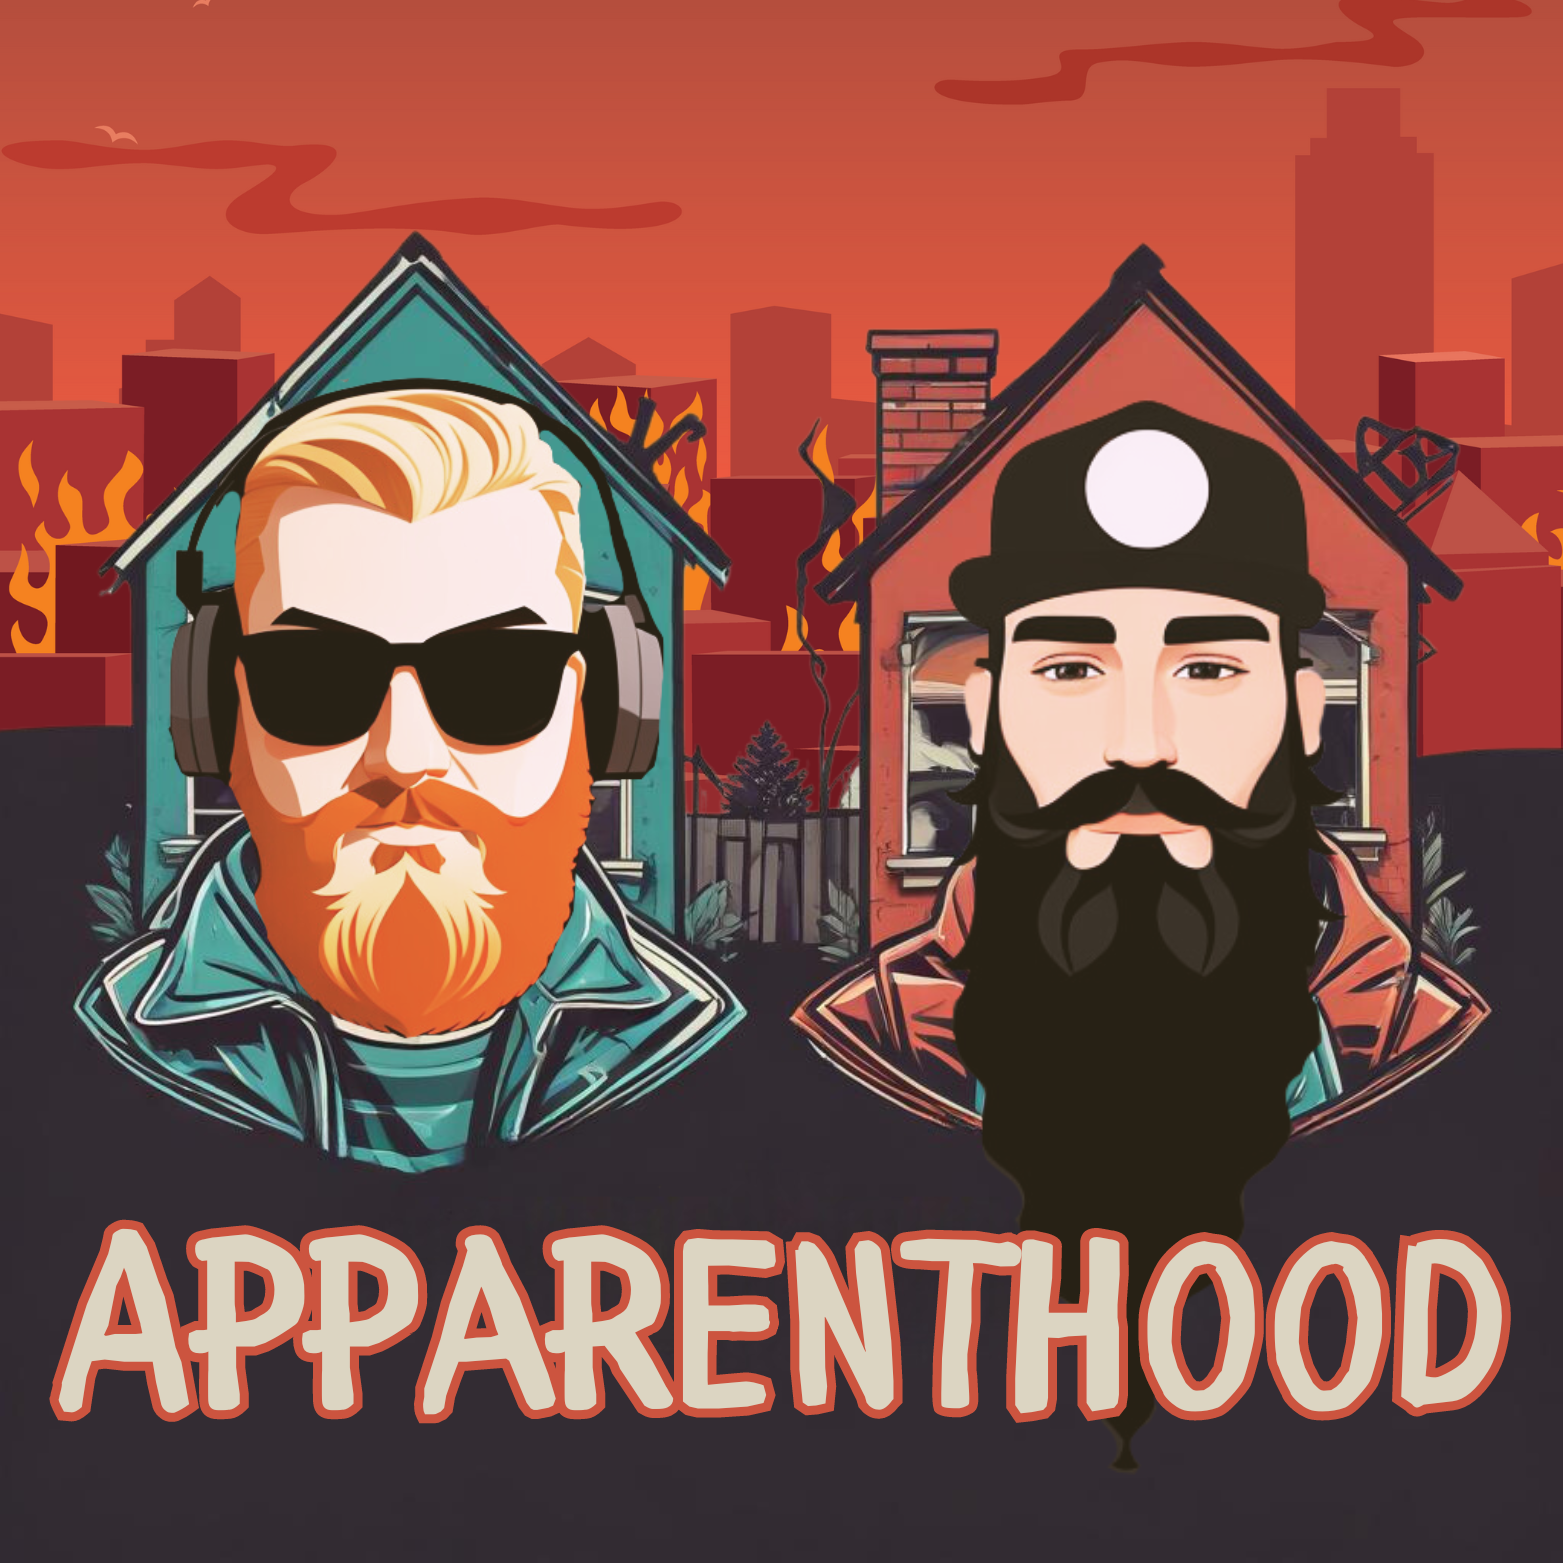 Apparenthood Podcast is a podcast where two dads share their real take on being a dad.